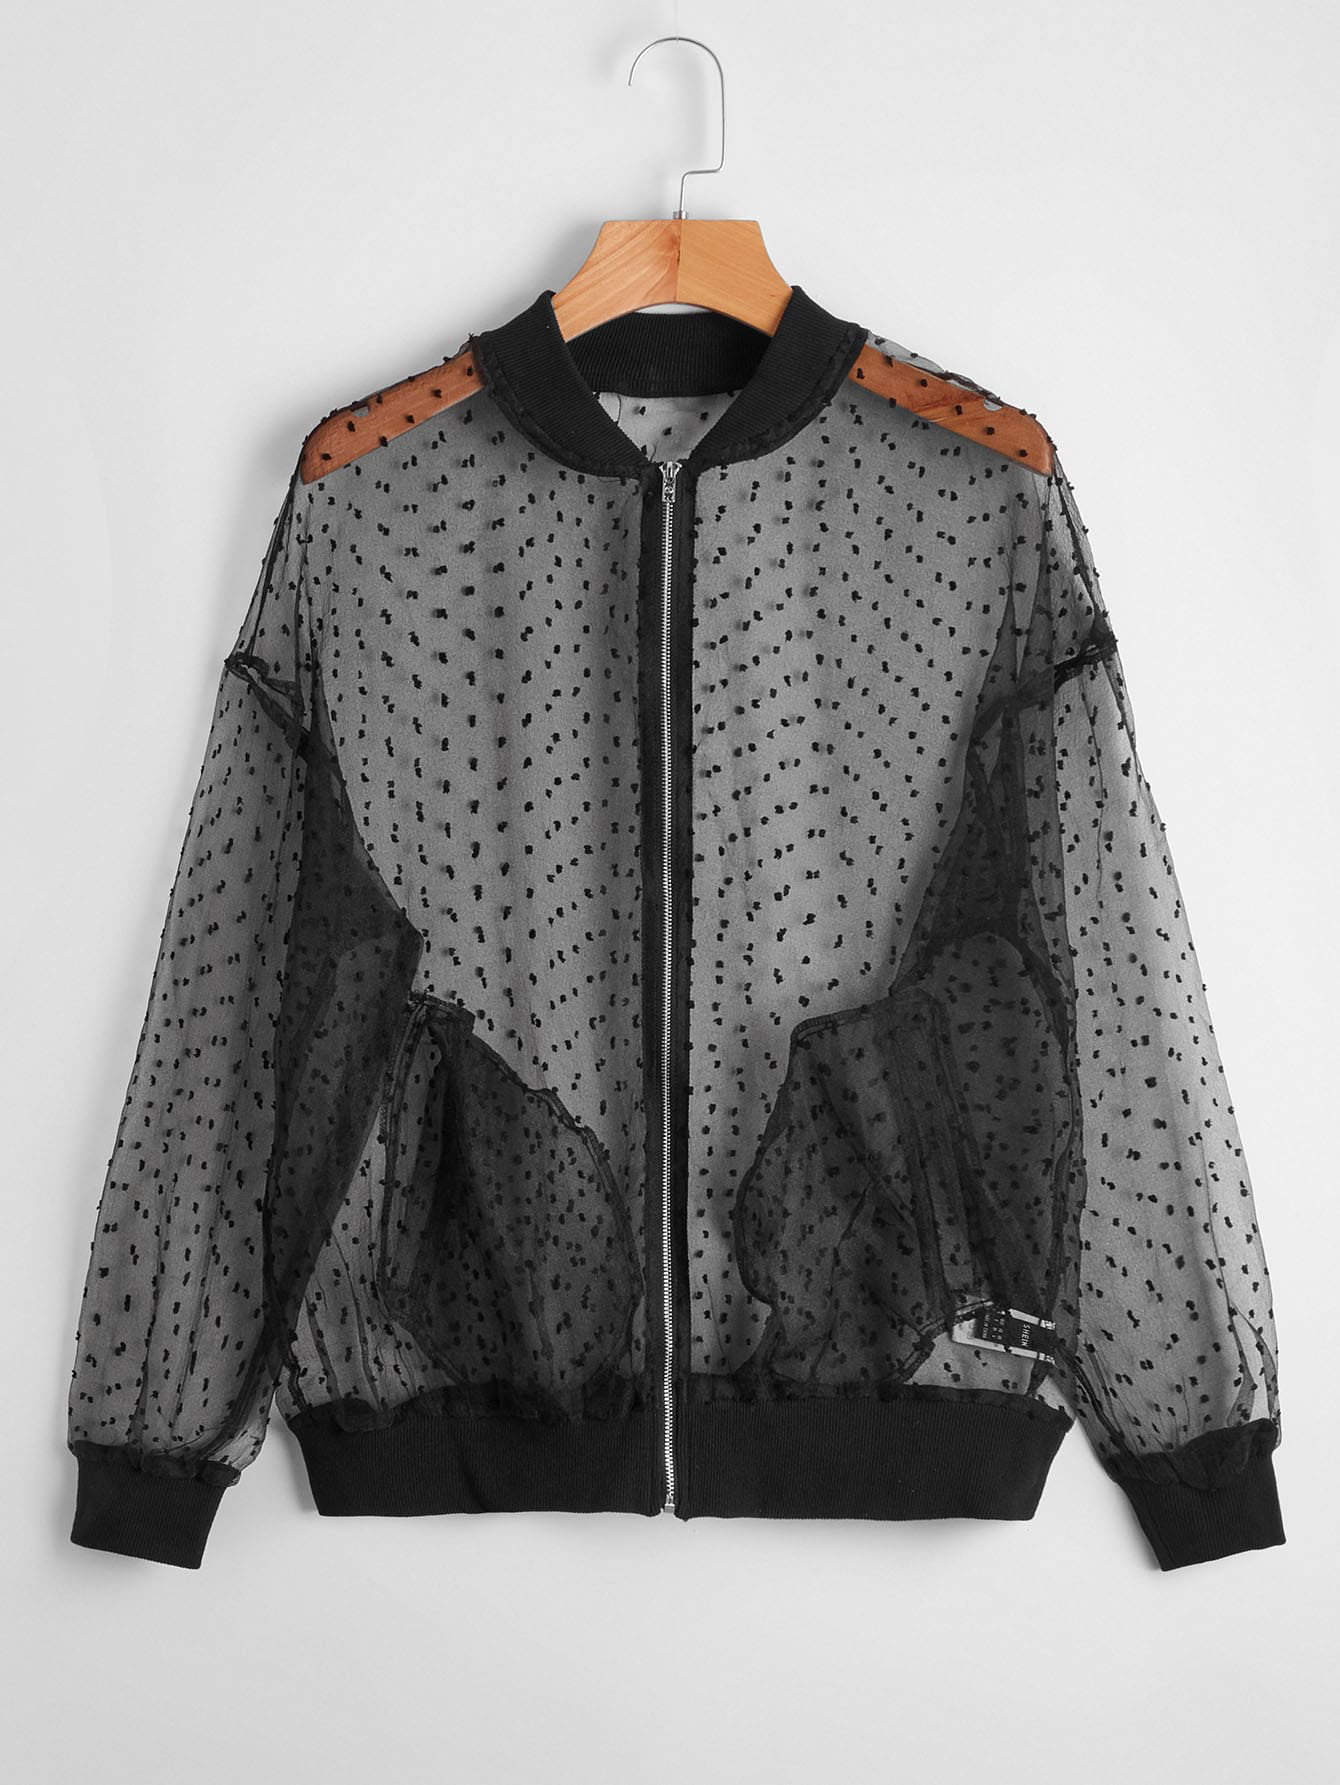 Lace Mesh Classic Bomber Jacket Coat Zip Up Light Weighted Jacket for Women